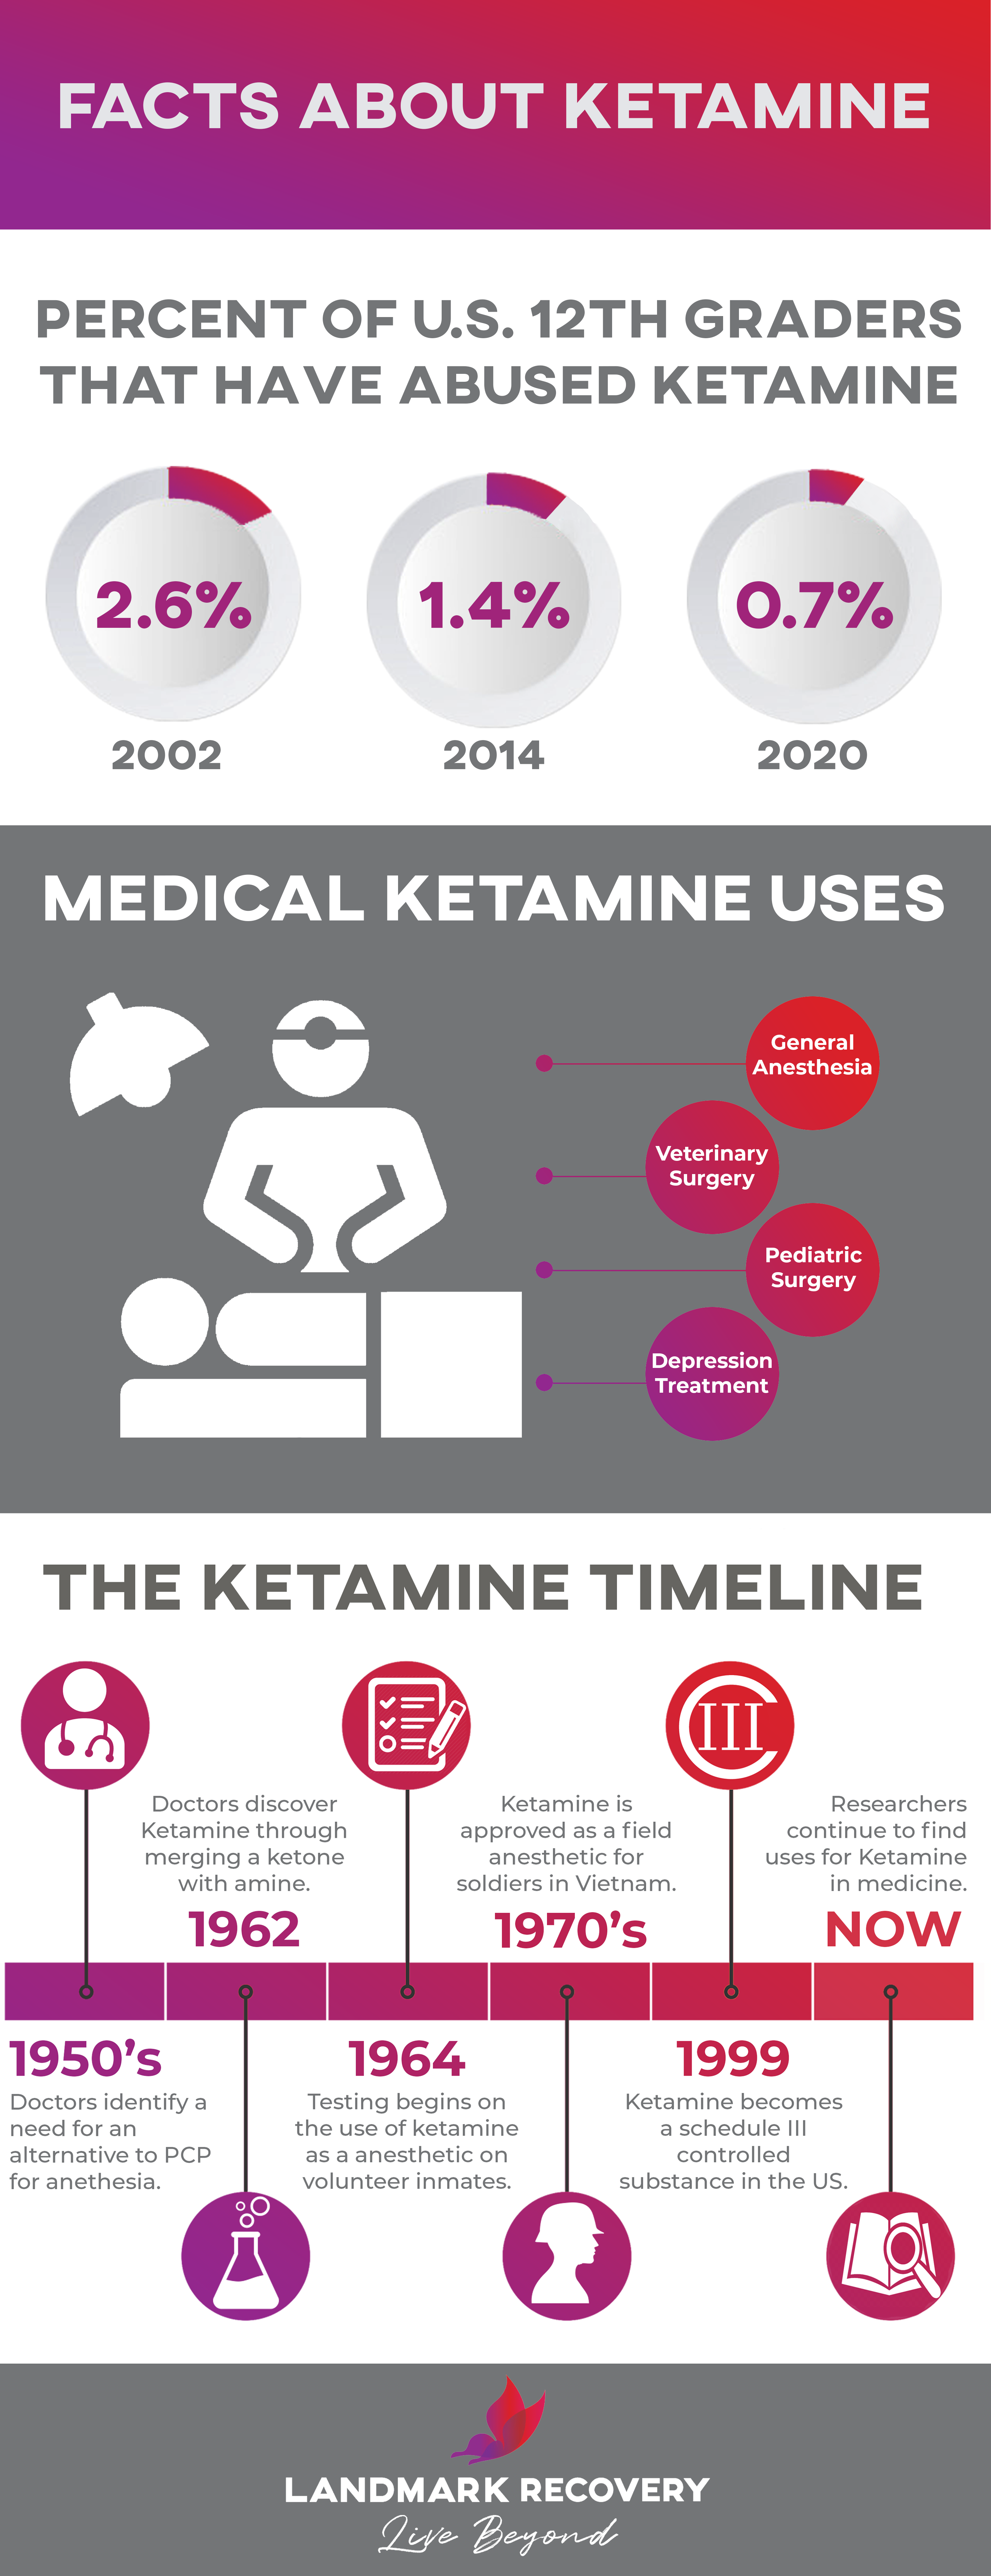 An infographic covering facts about ketamine